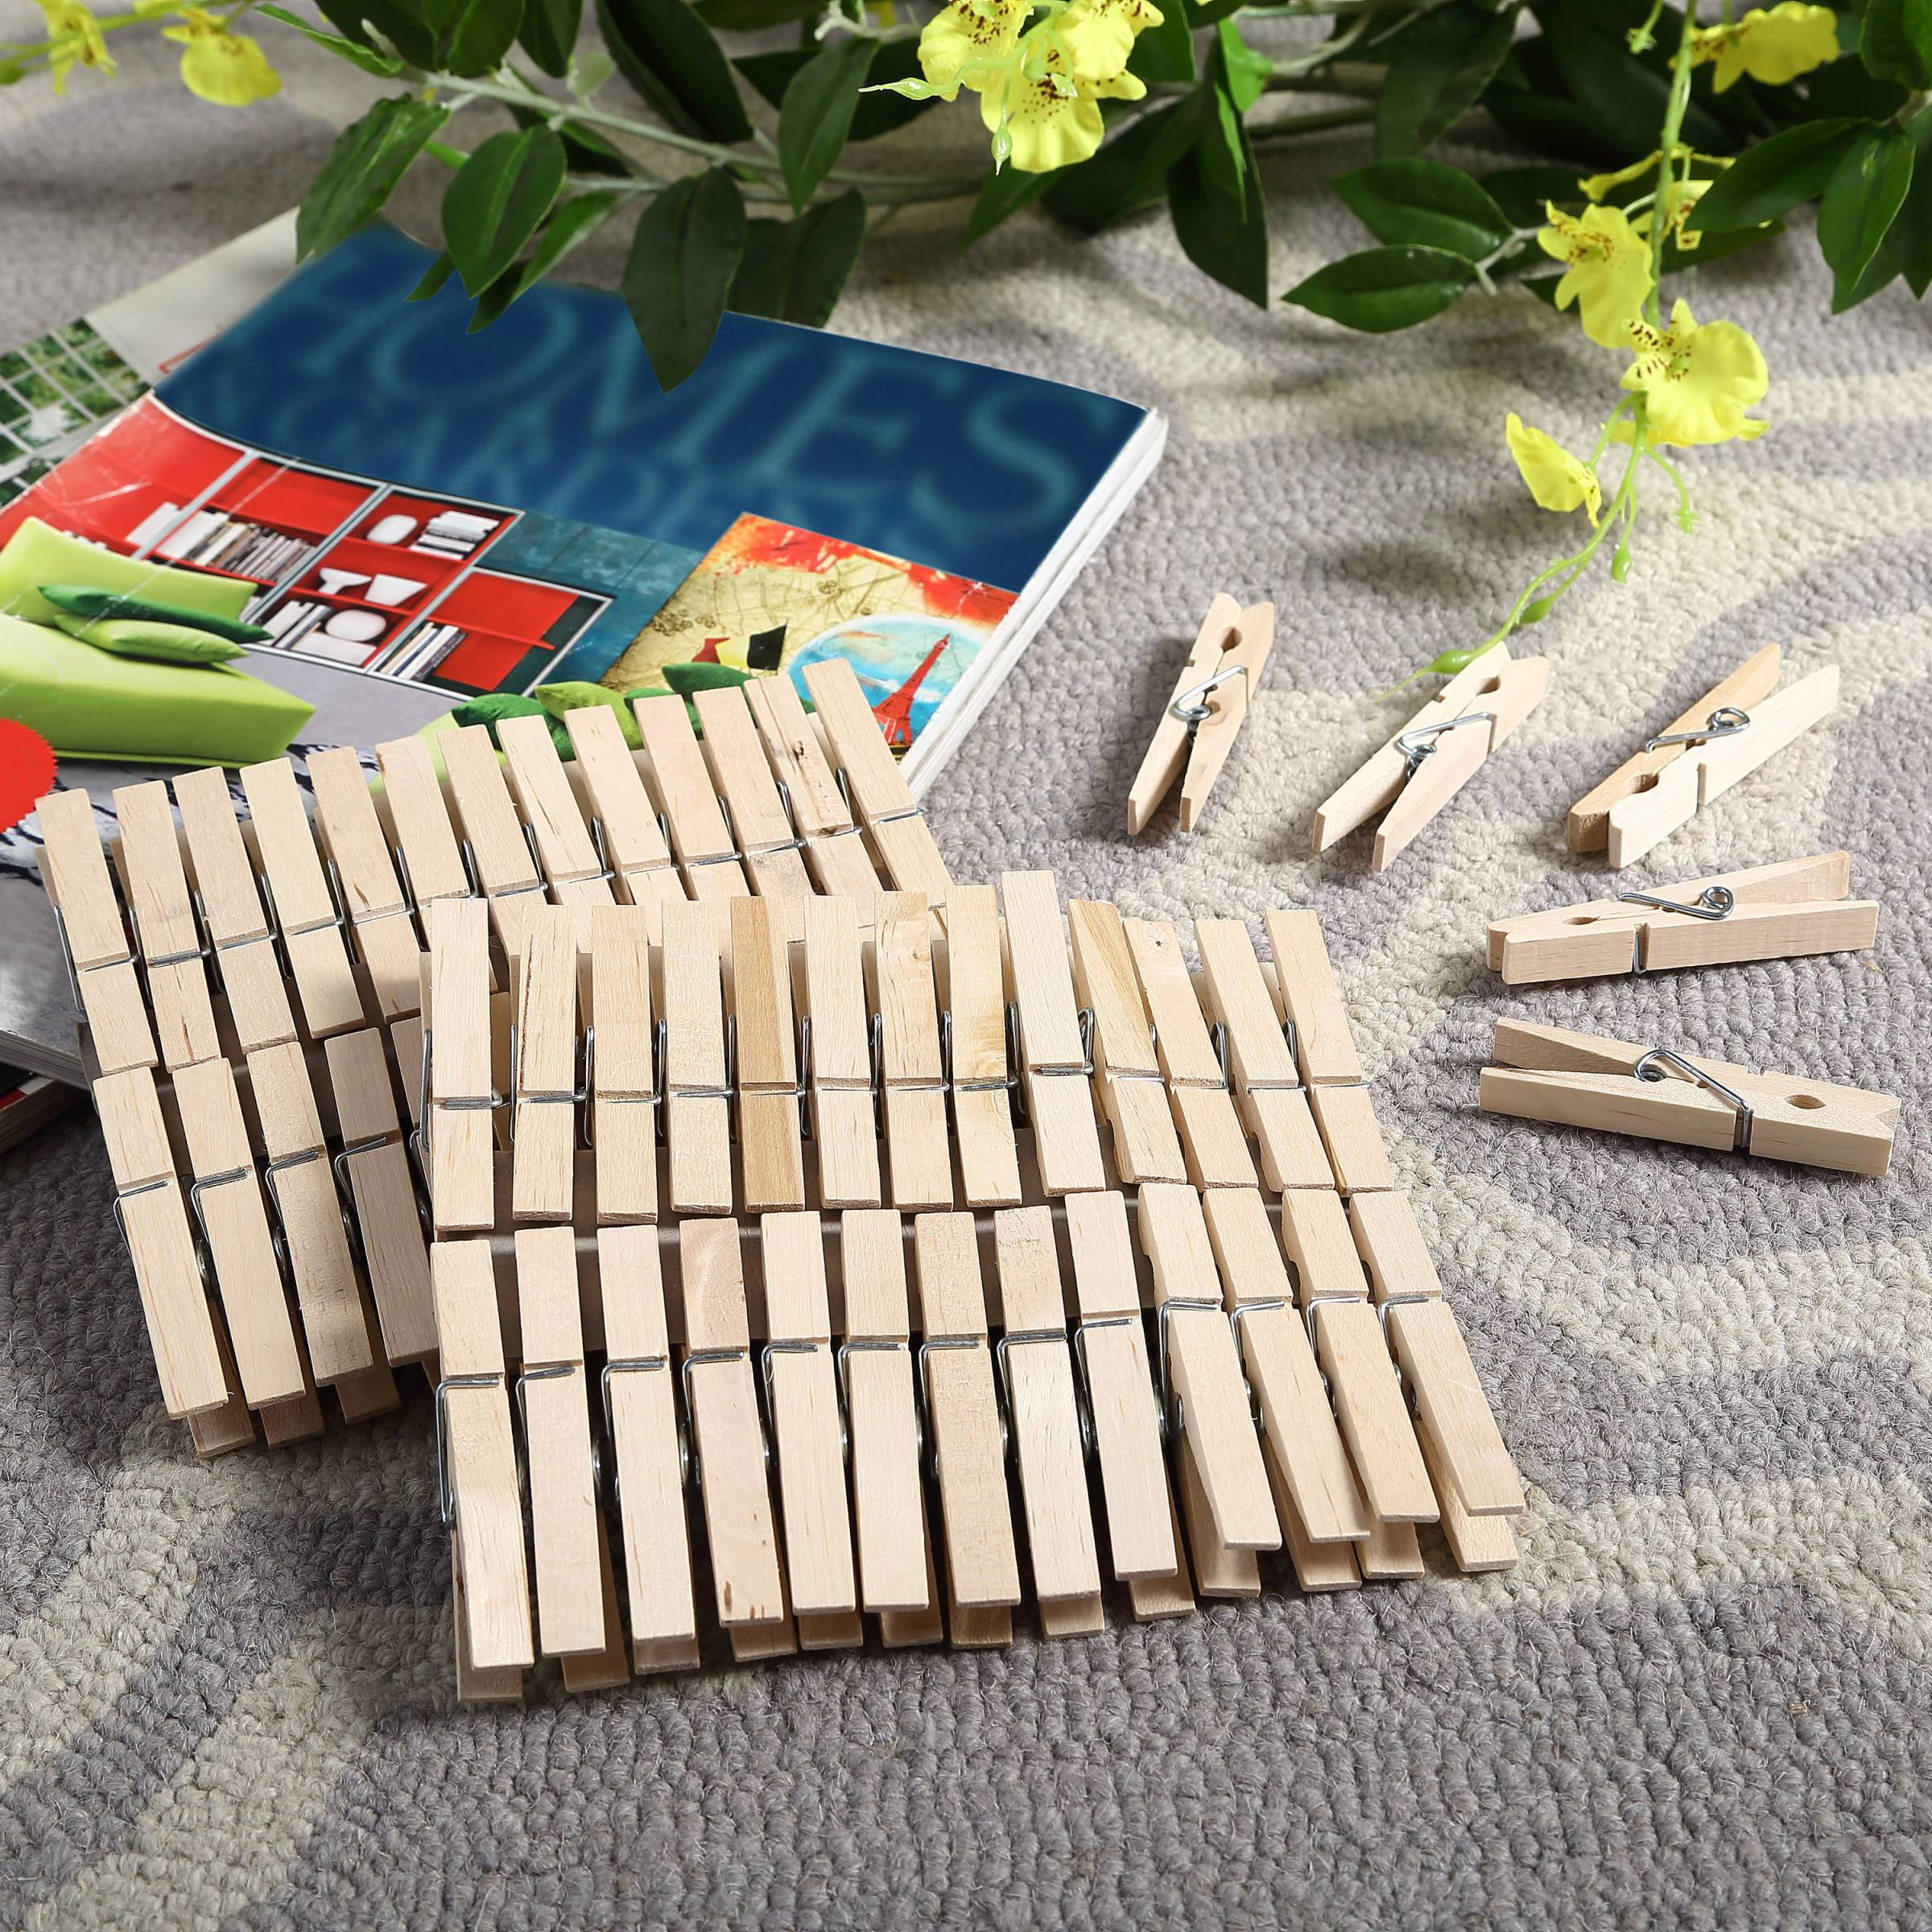 Wood Clothes Pins, 400 PCS 2.83 inches Clothes Pins Wooden for Multipurpose  Everyday Laundry, Clothes, Towels, Craft, Photos, Art Wall, by GNIEMCKIN.